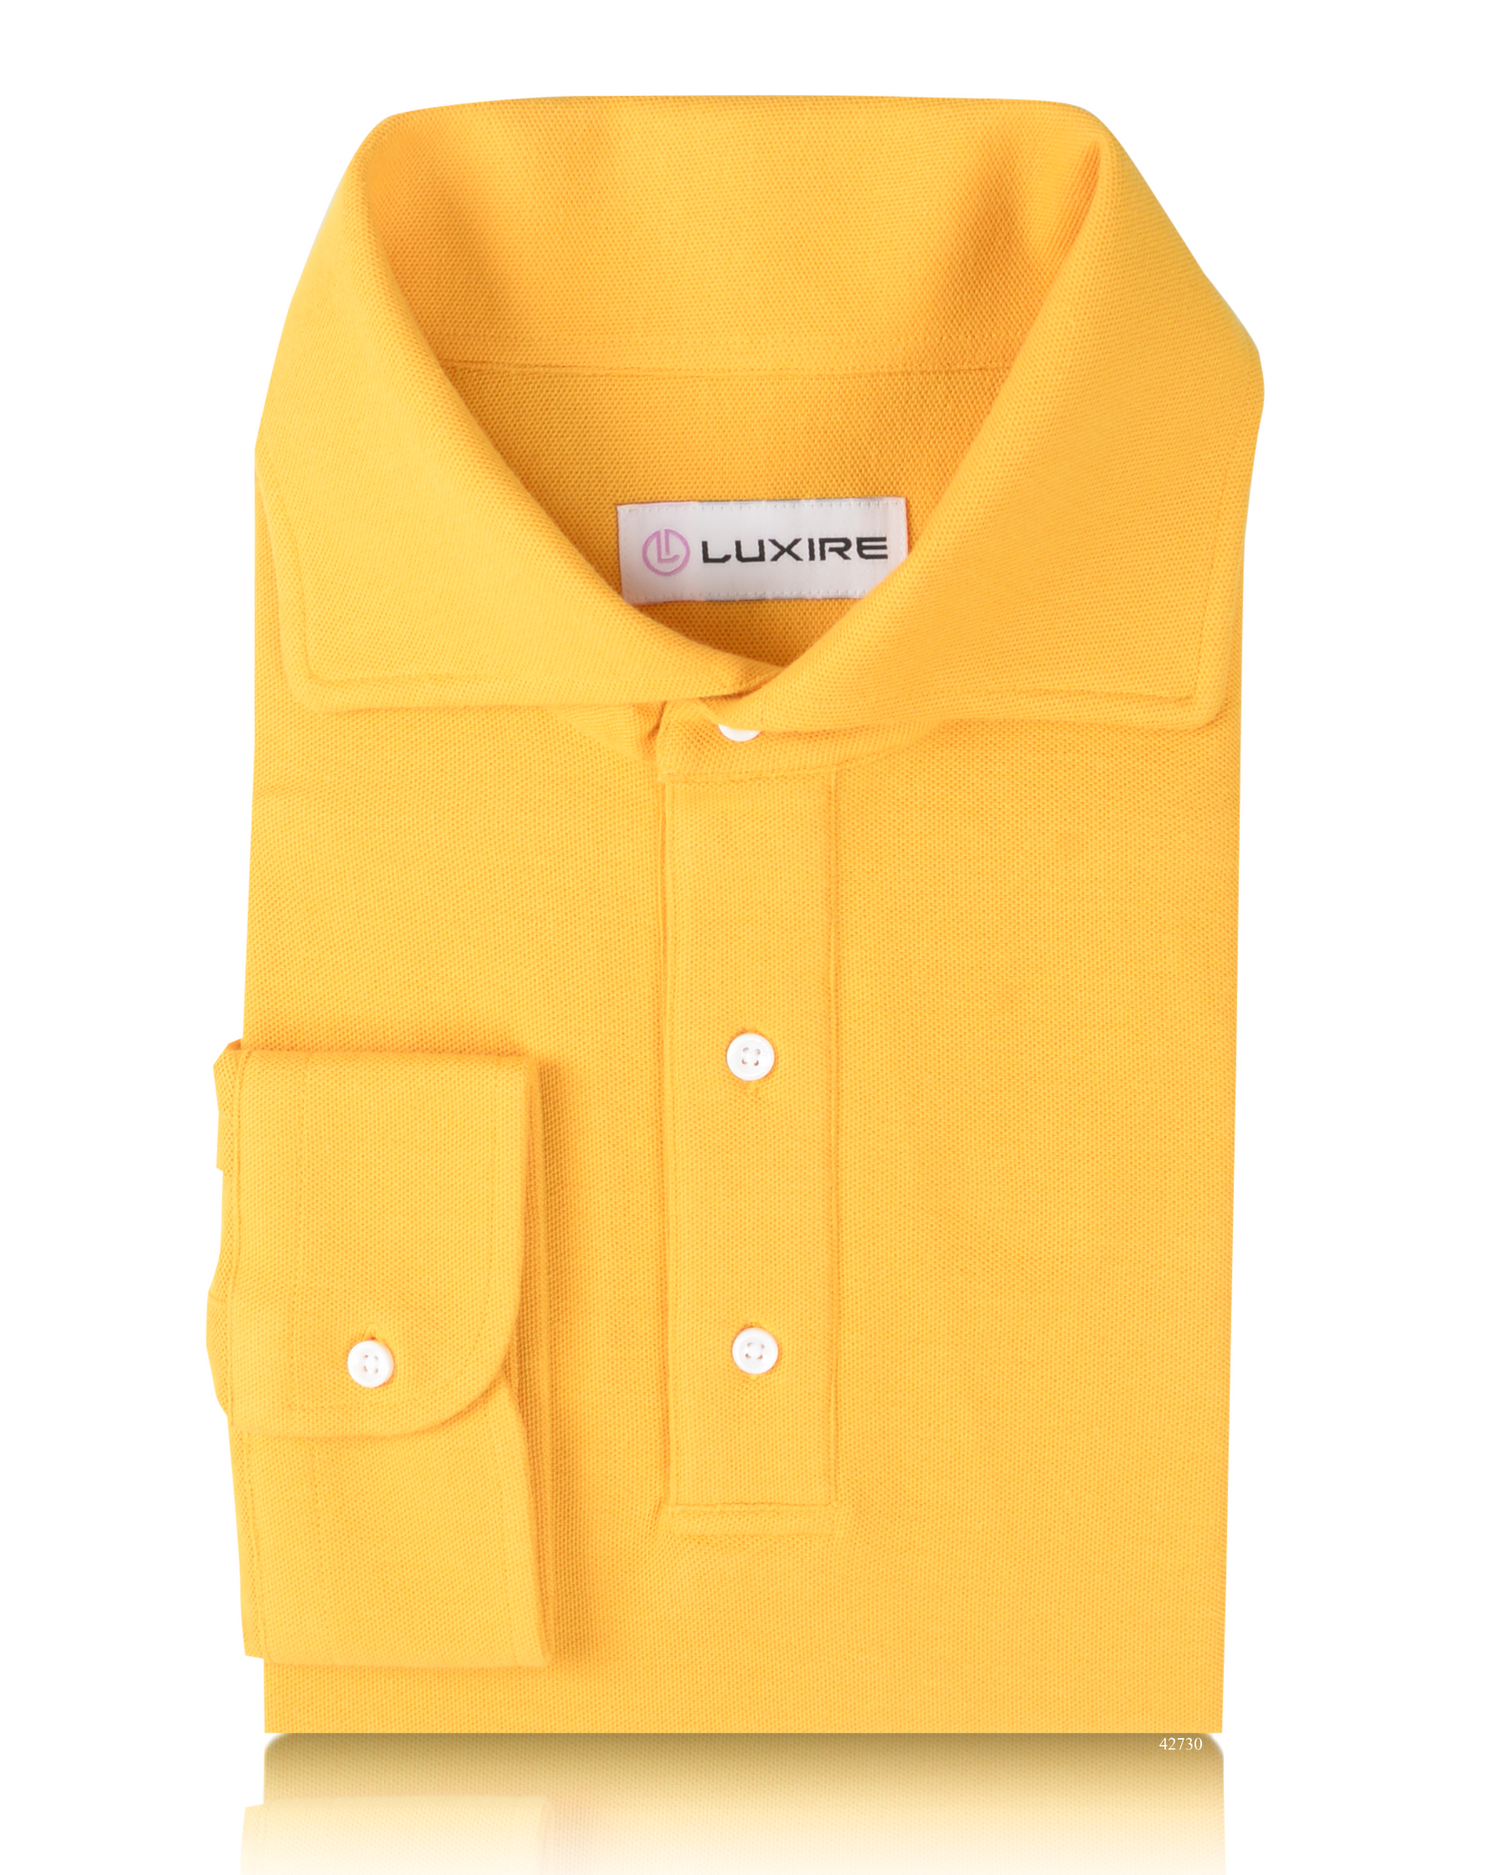 Front of the custom oxford polo shirt for men by Luxire in golden yellow